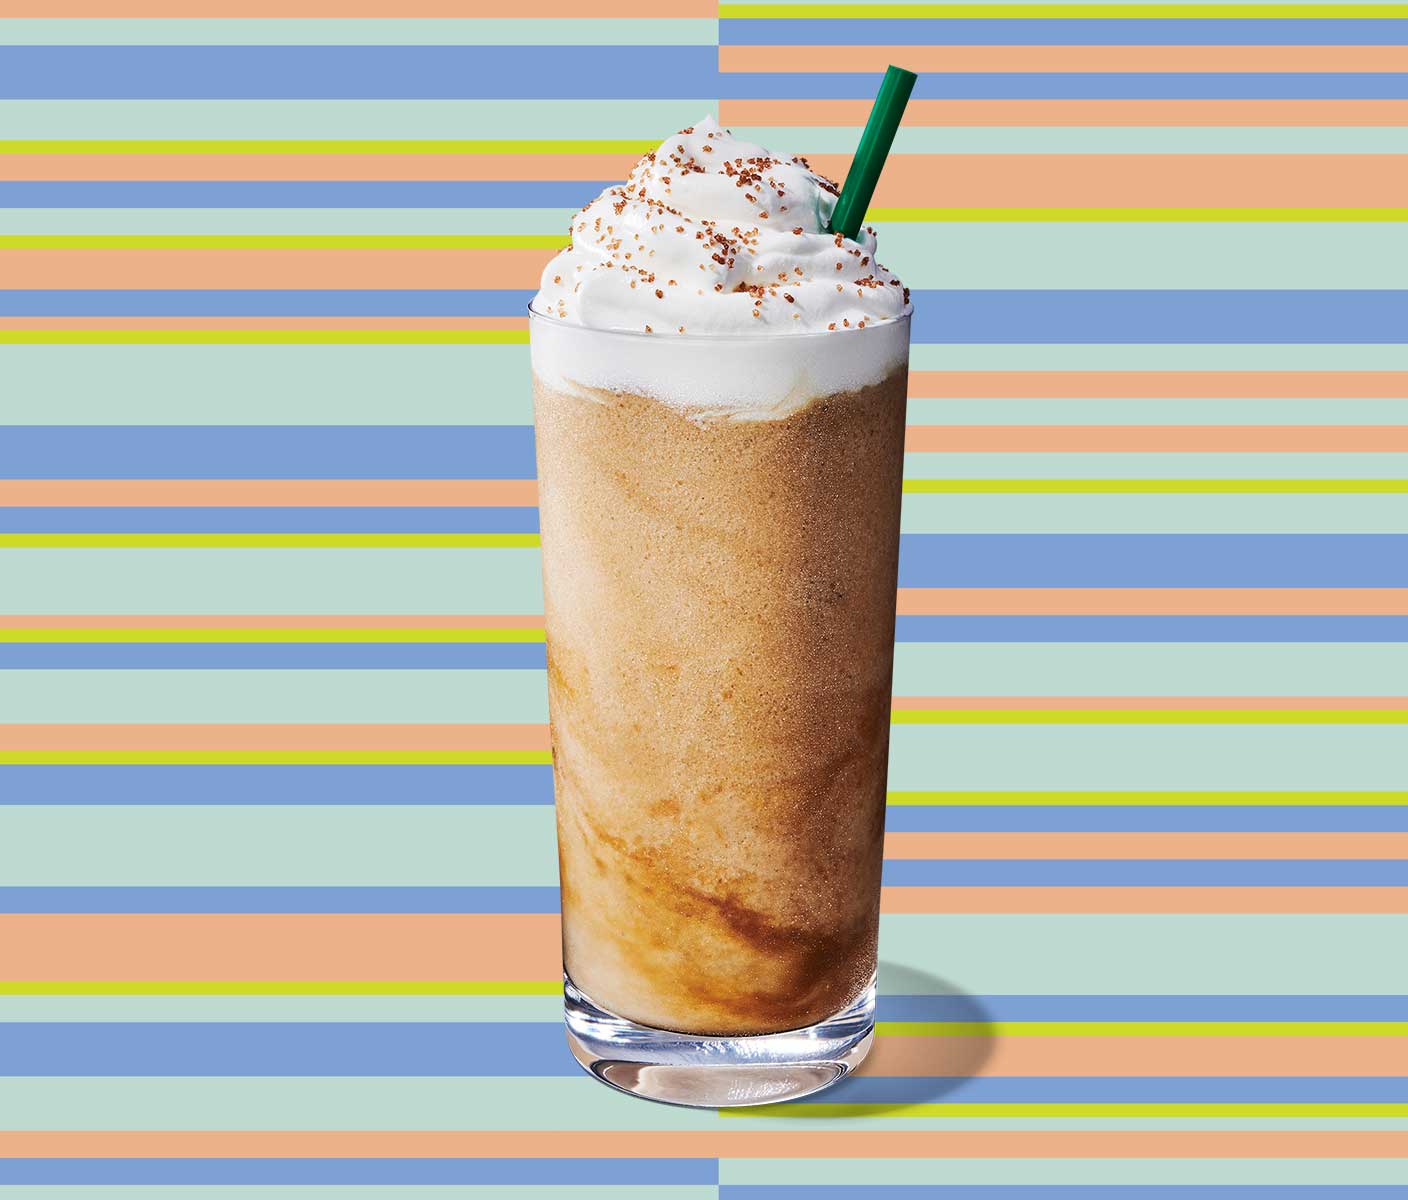 Blended coffee drink in a tall glass with whip cream topping and a straw visible.